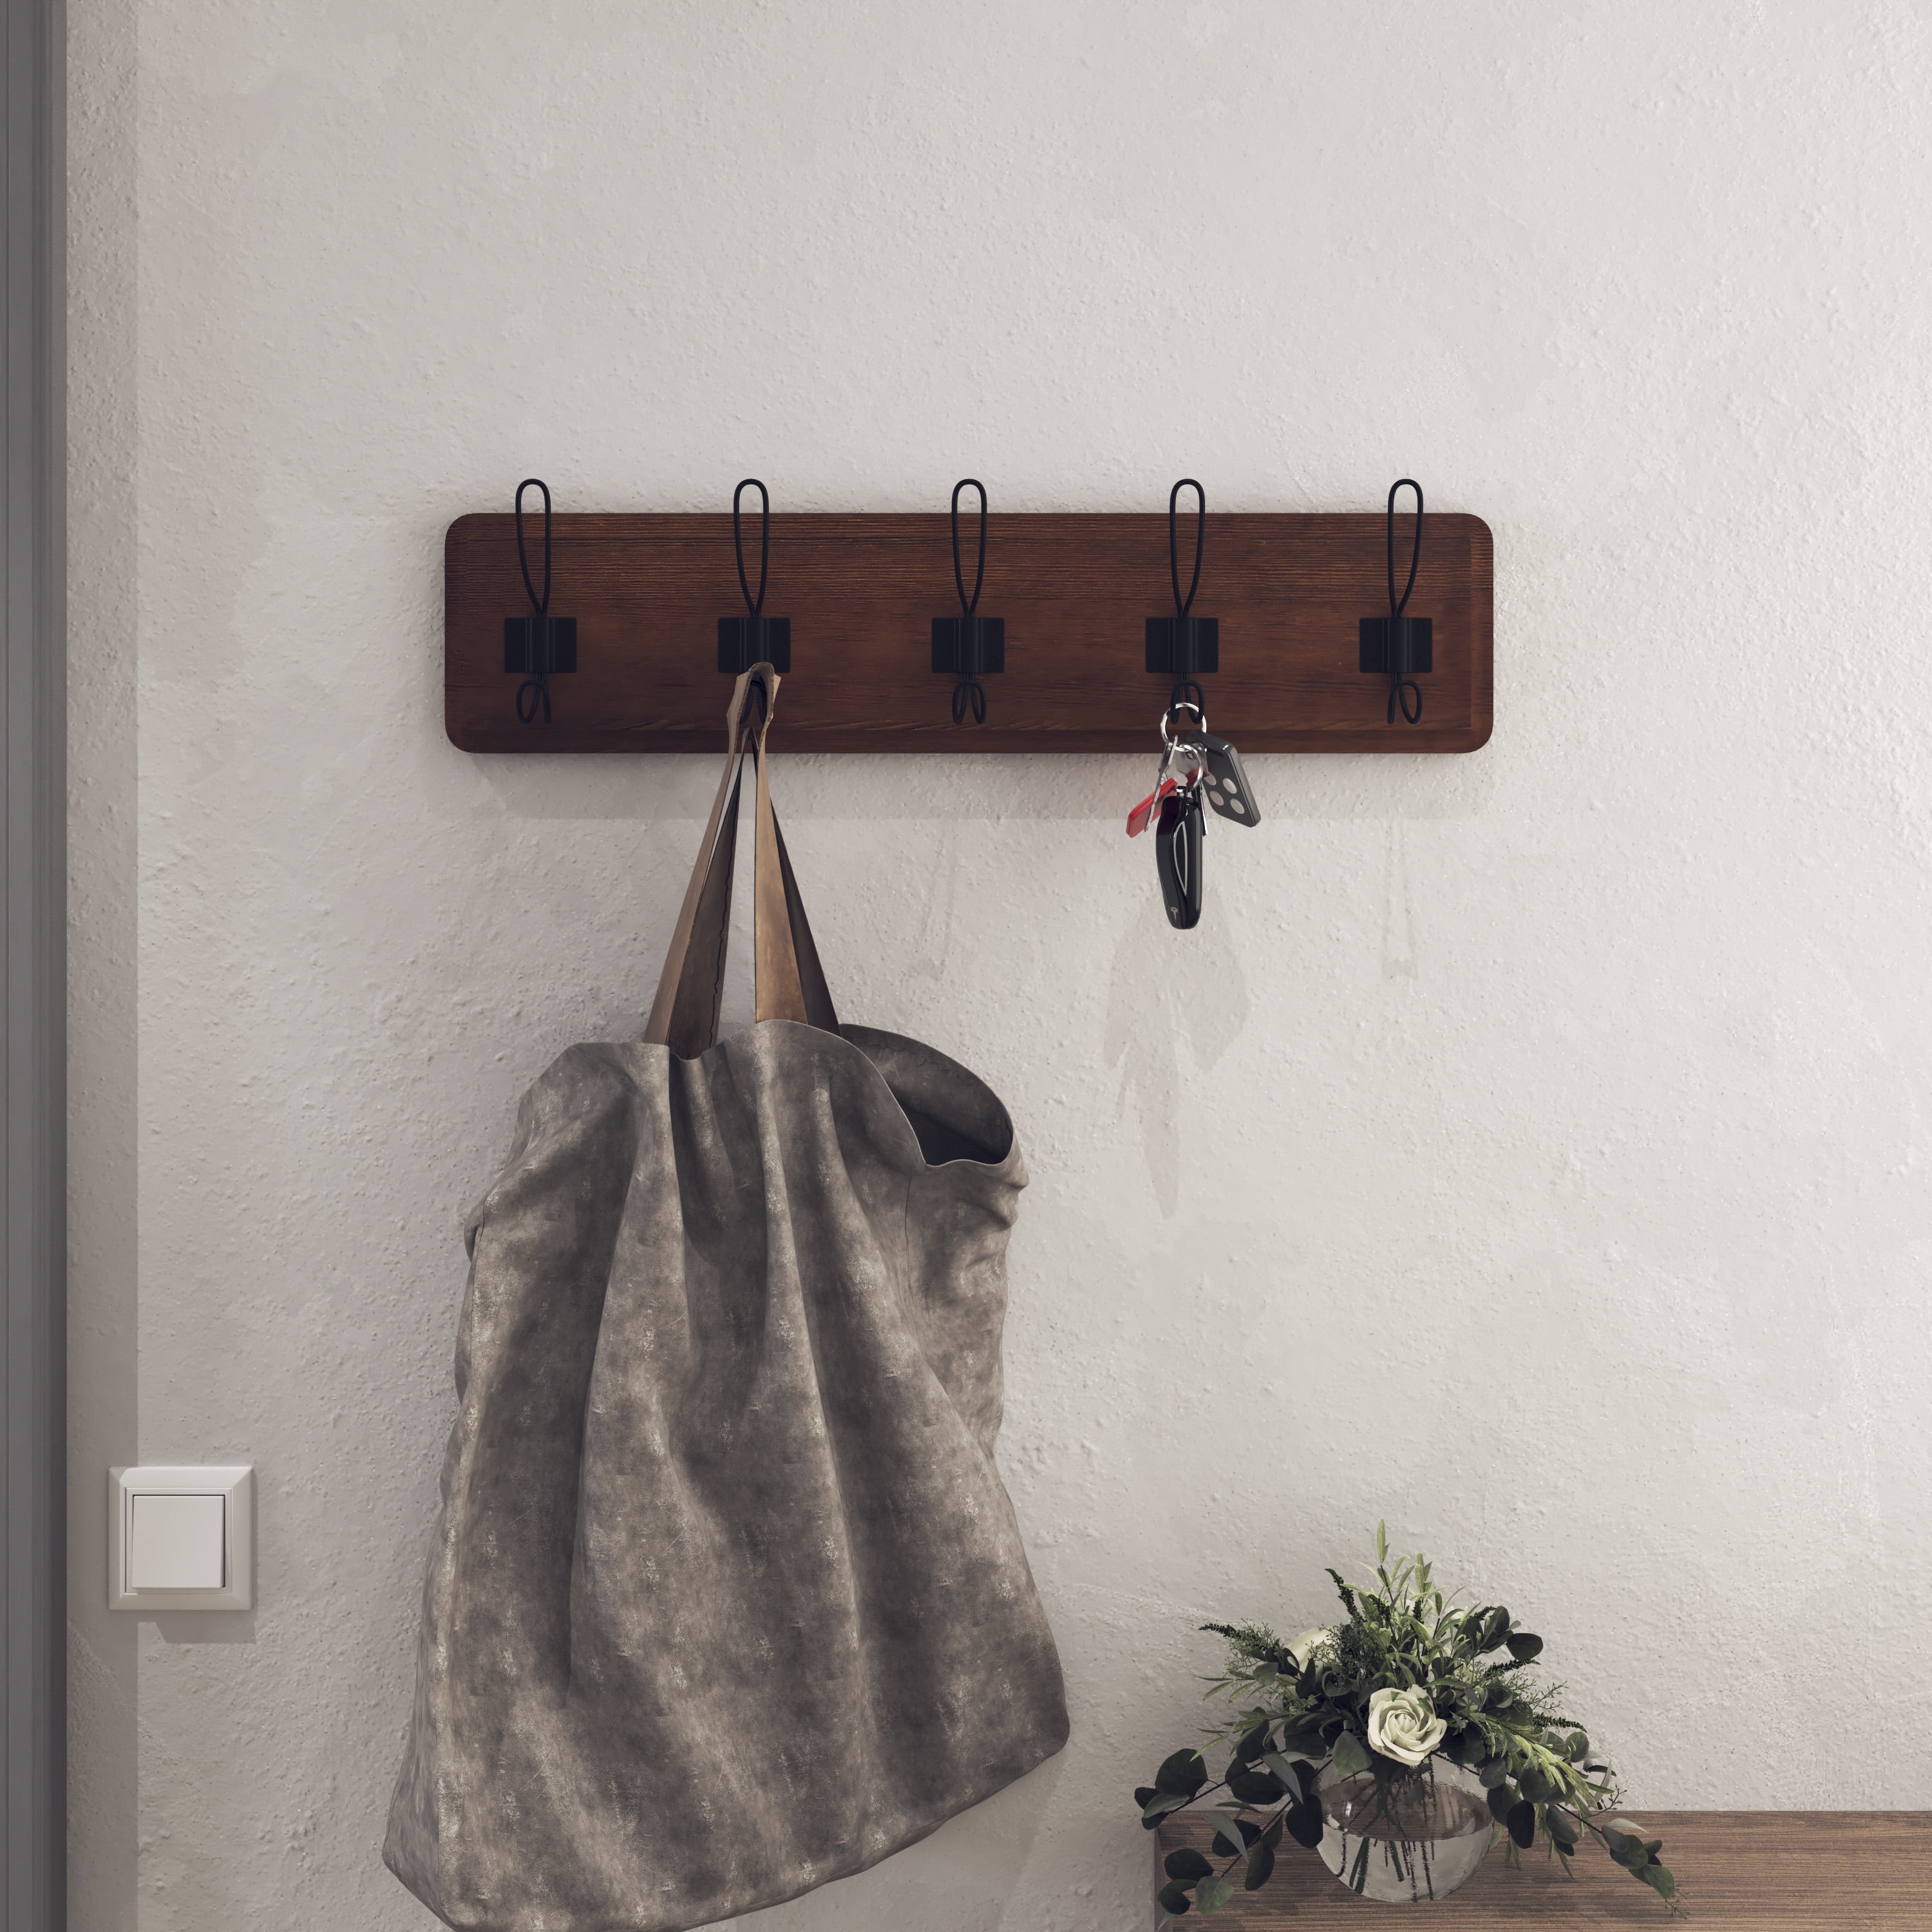 HBCY Creations Rustic Coat Rack with 5 Hooks - Classic Brown Wall